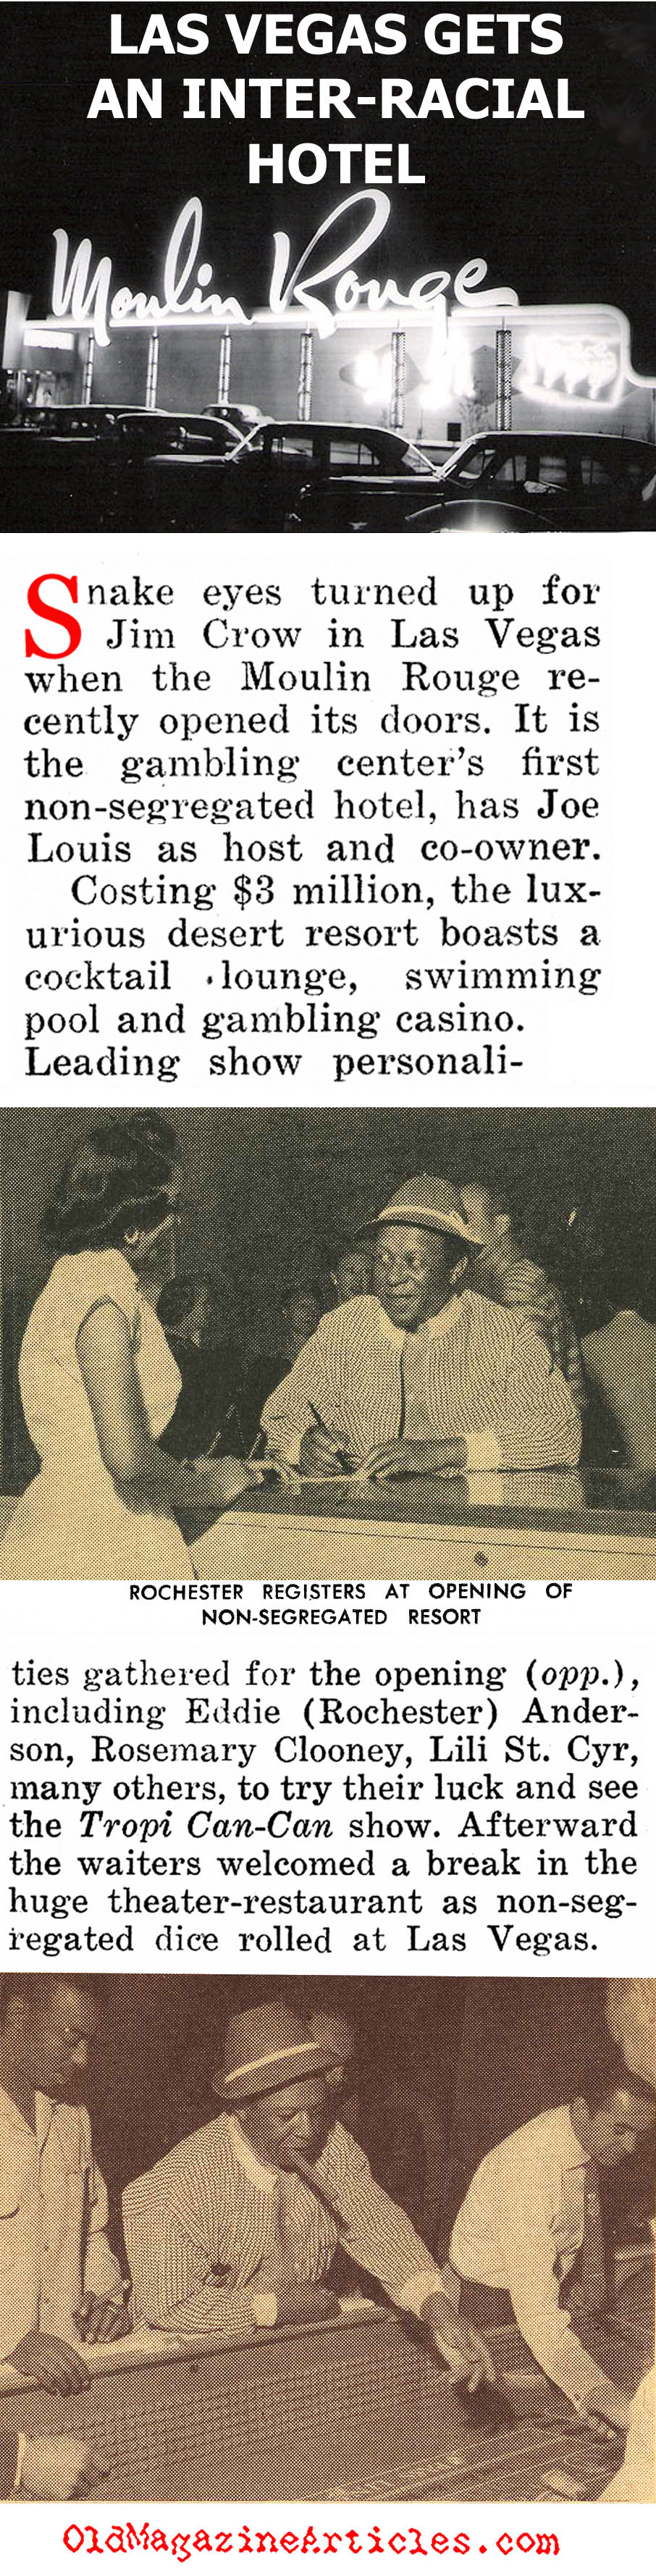 Racial Integration Comes to Sin City (People Today Magazine, 1955)